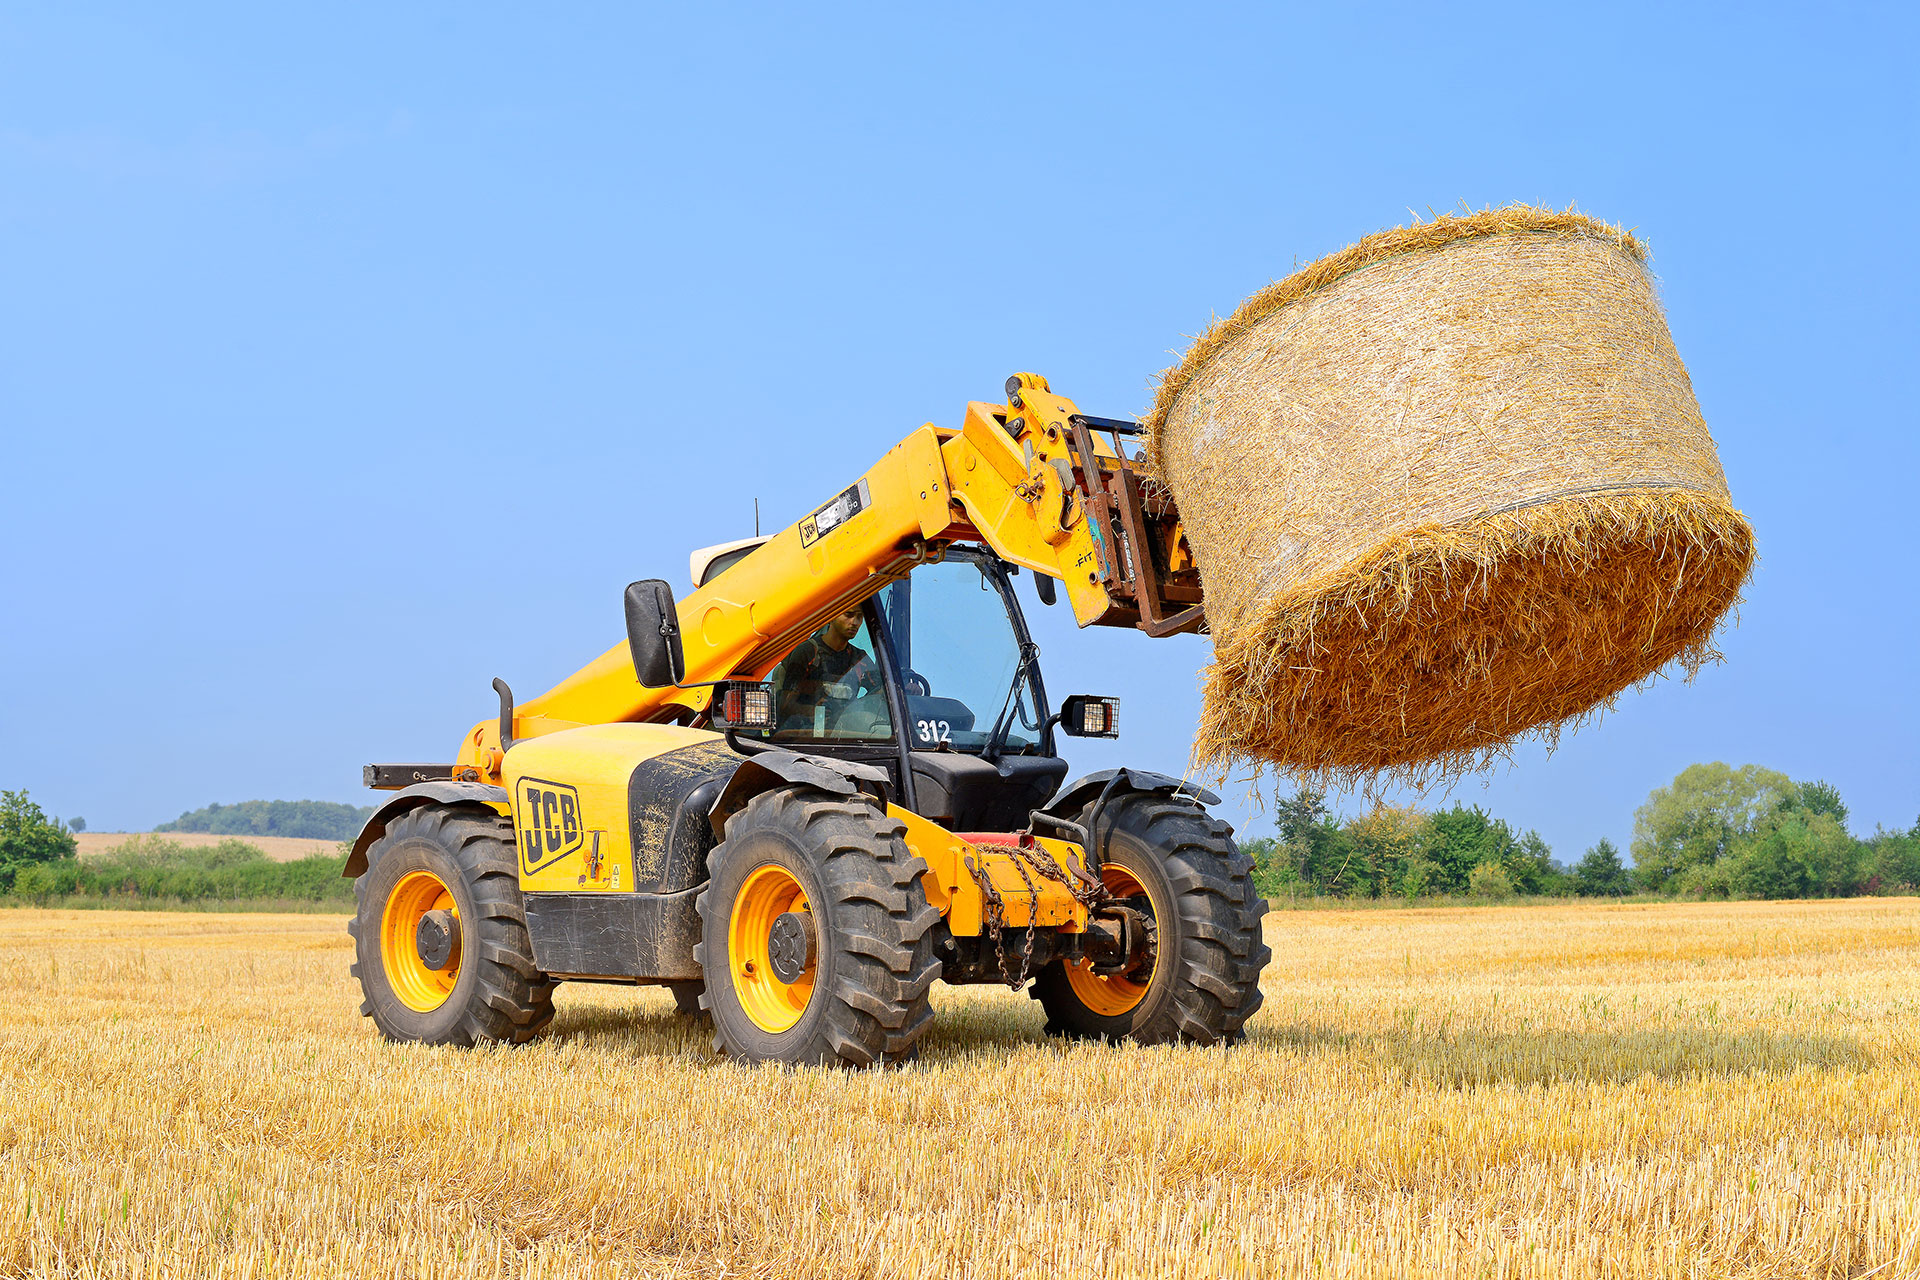 Telehandler in a field with a round bale.